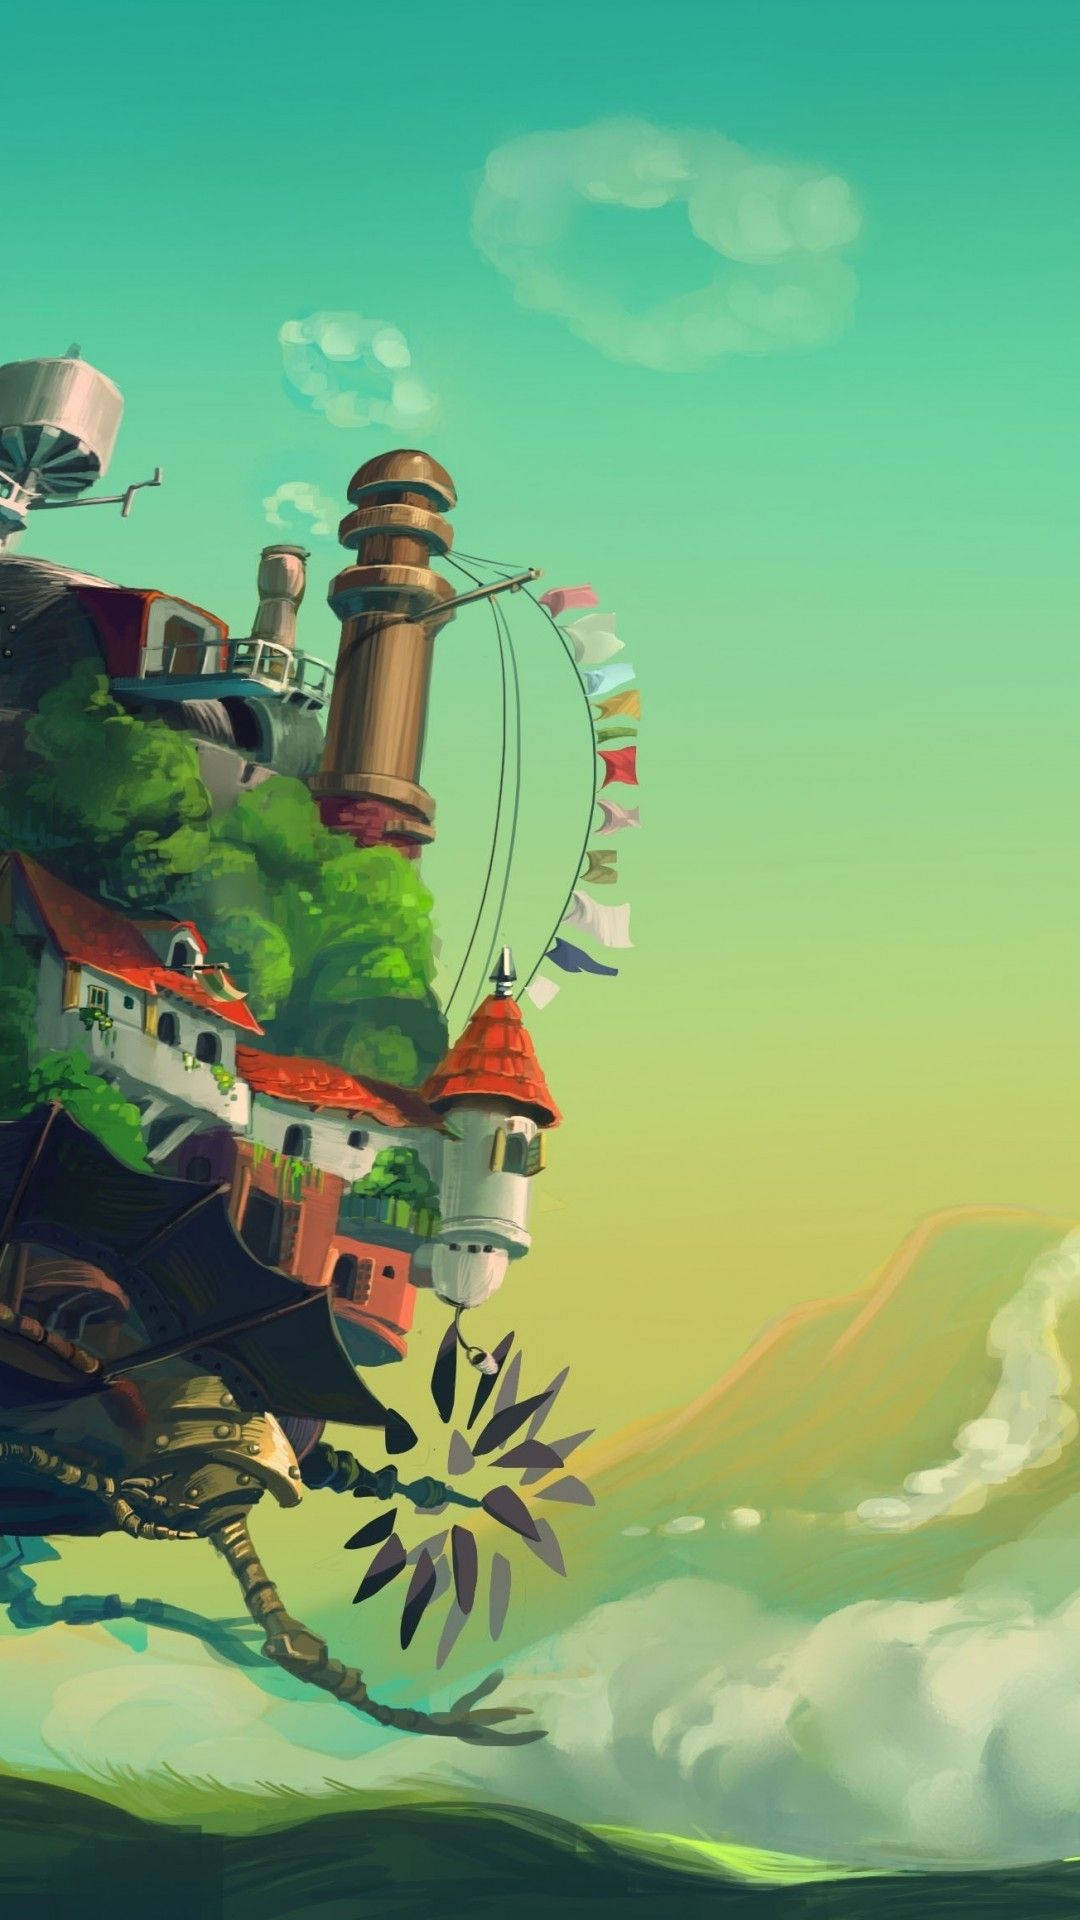 Imagery from Studio Ghibli brings your iPhone to life! Wallpaper